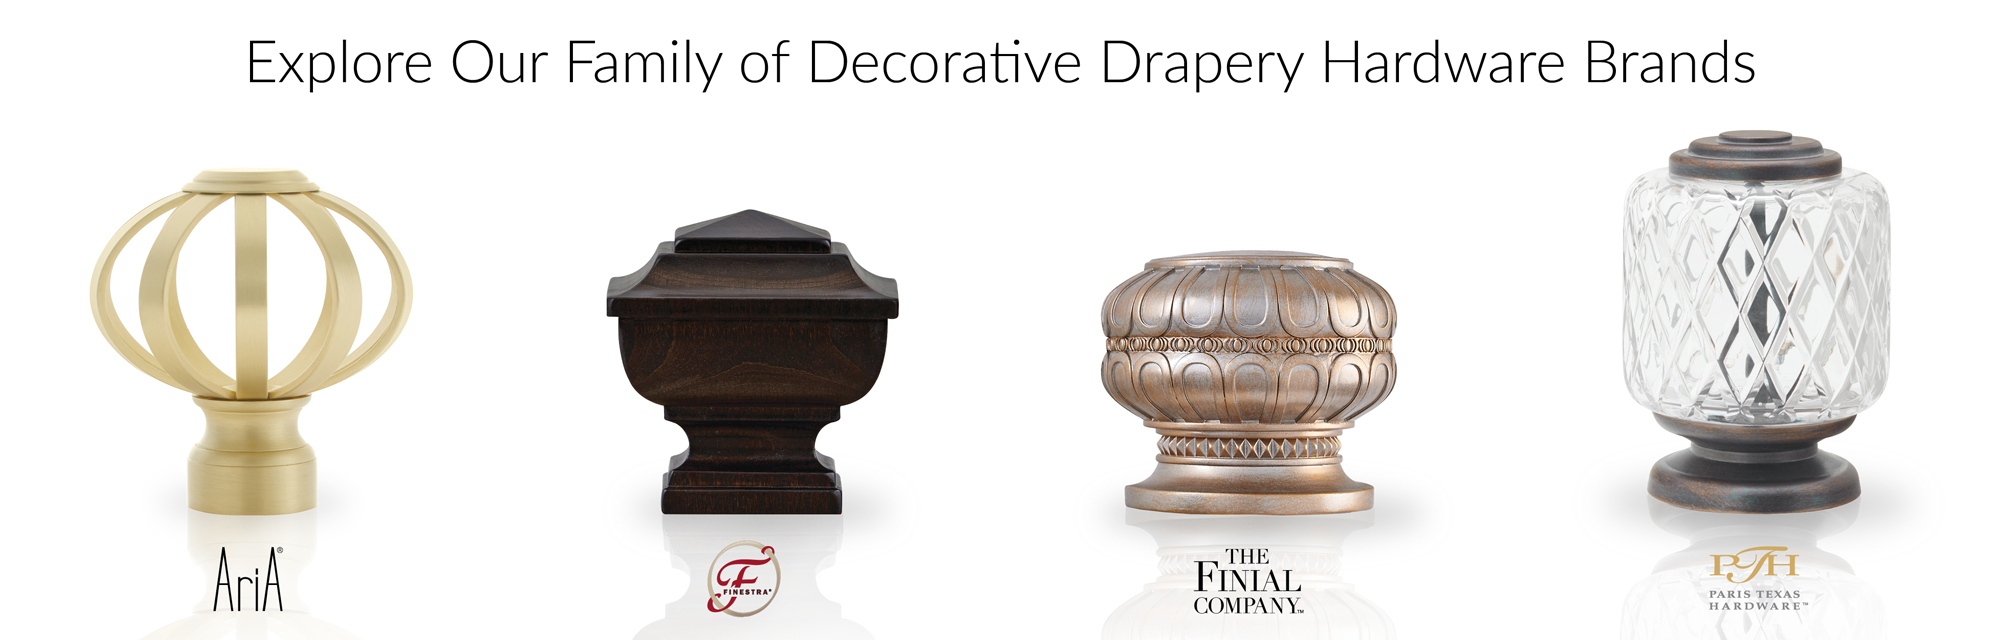 Explore our Family of Decorative Drapery Hardware Brands